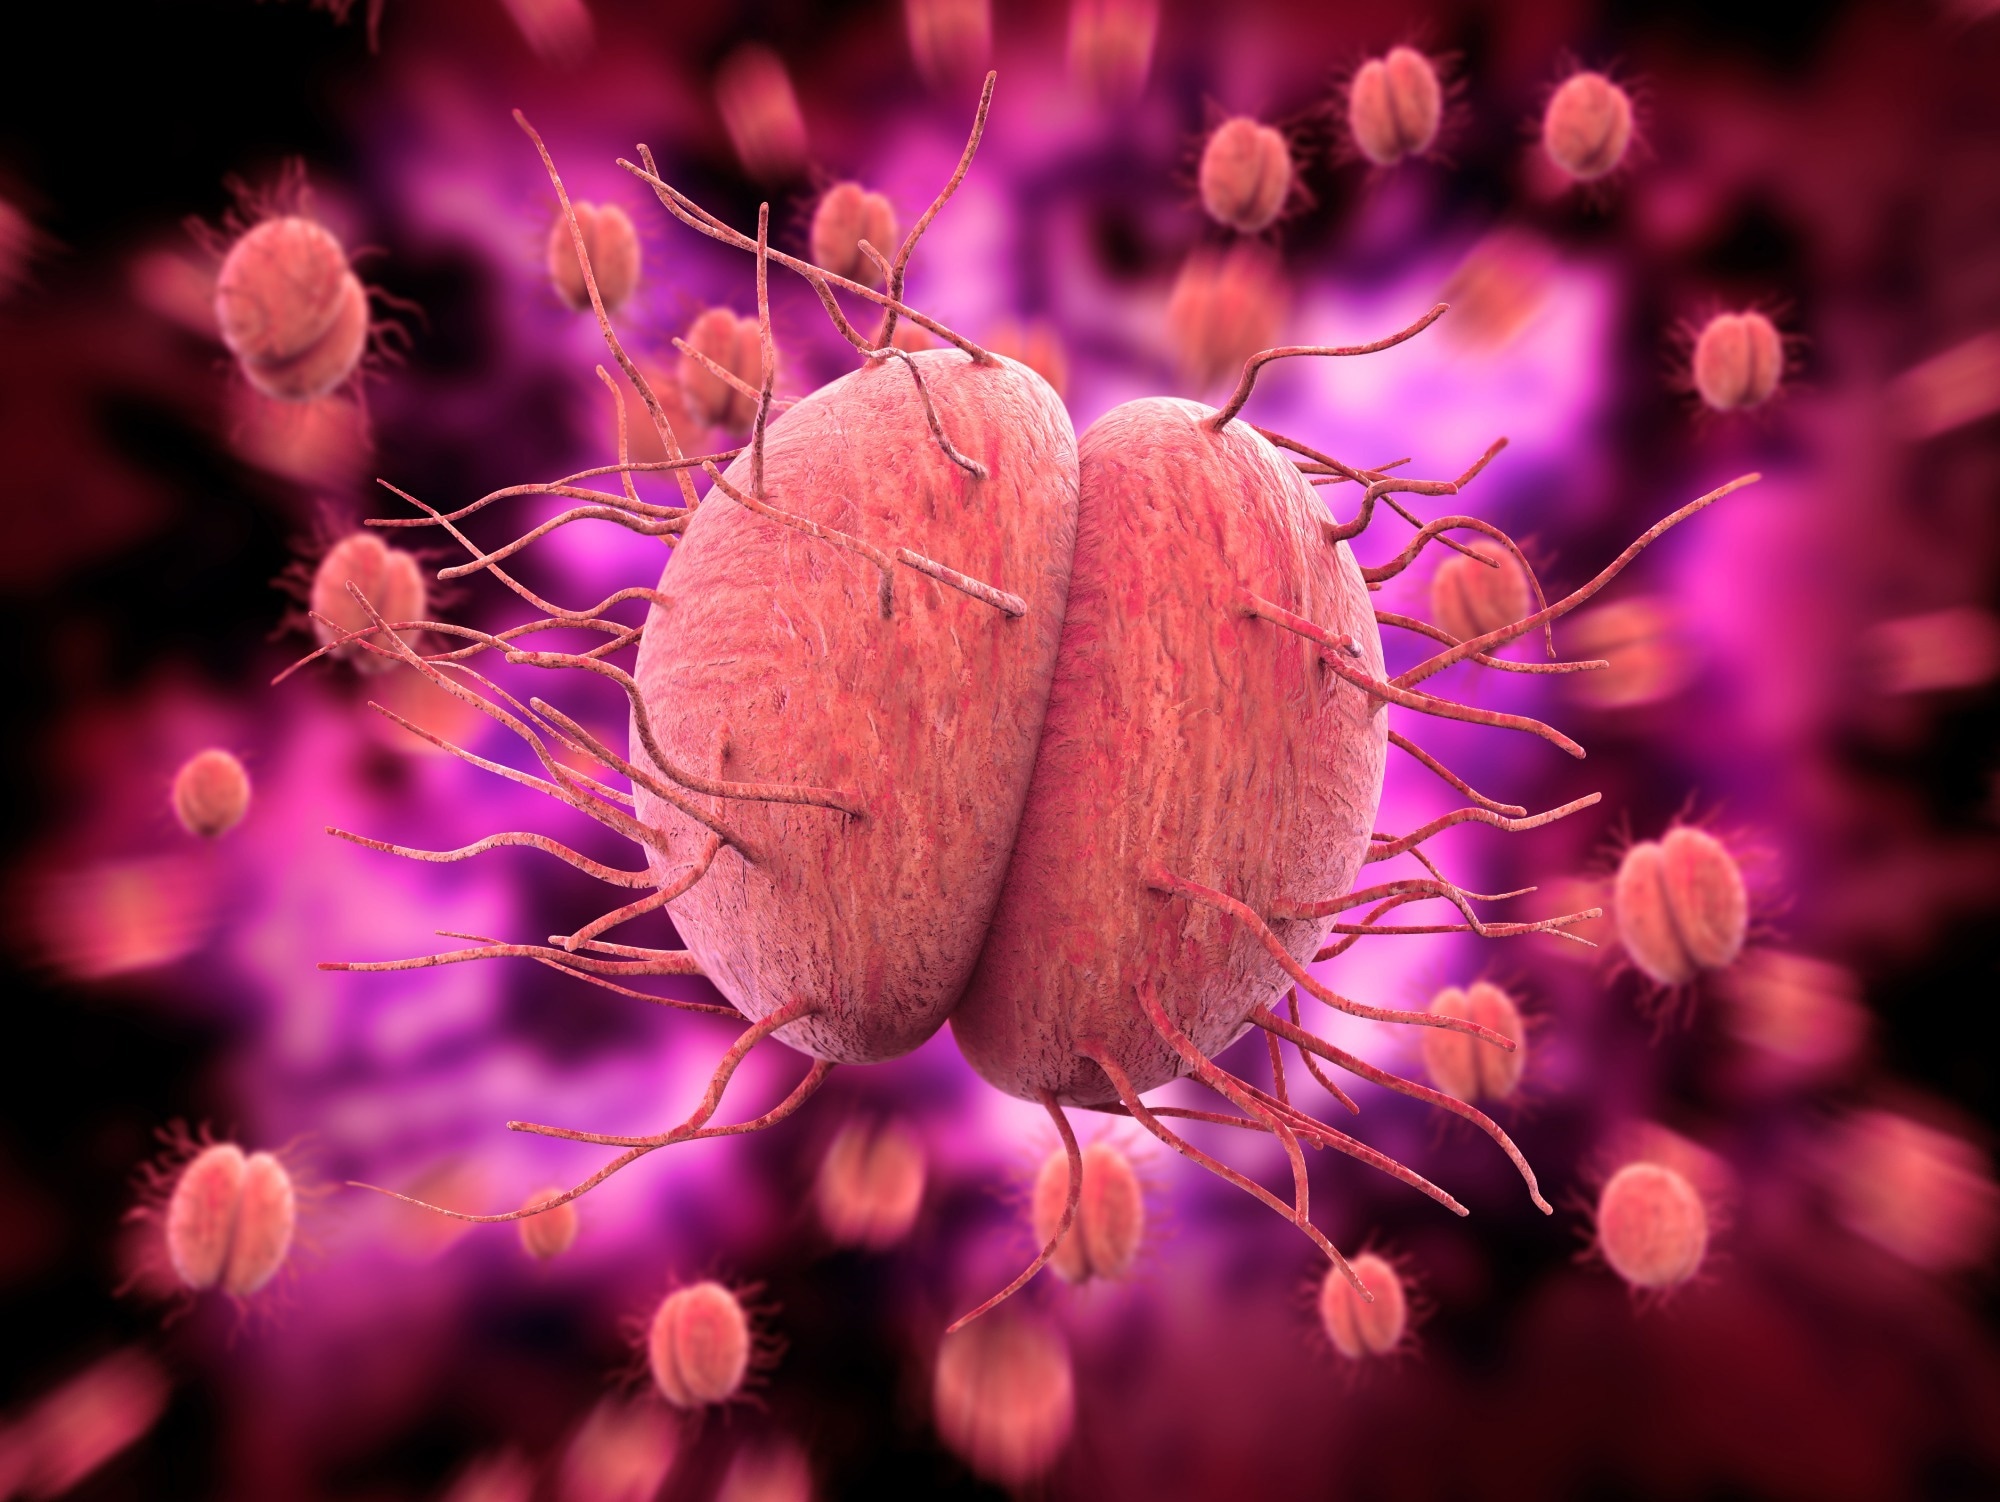 Dispatch: Rebound of Gonorrhea after Lifting of COVID-19 Preventive Measures, England. Image Credit: Giovanni Cancemi / Shutterstock